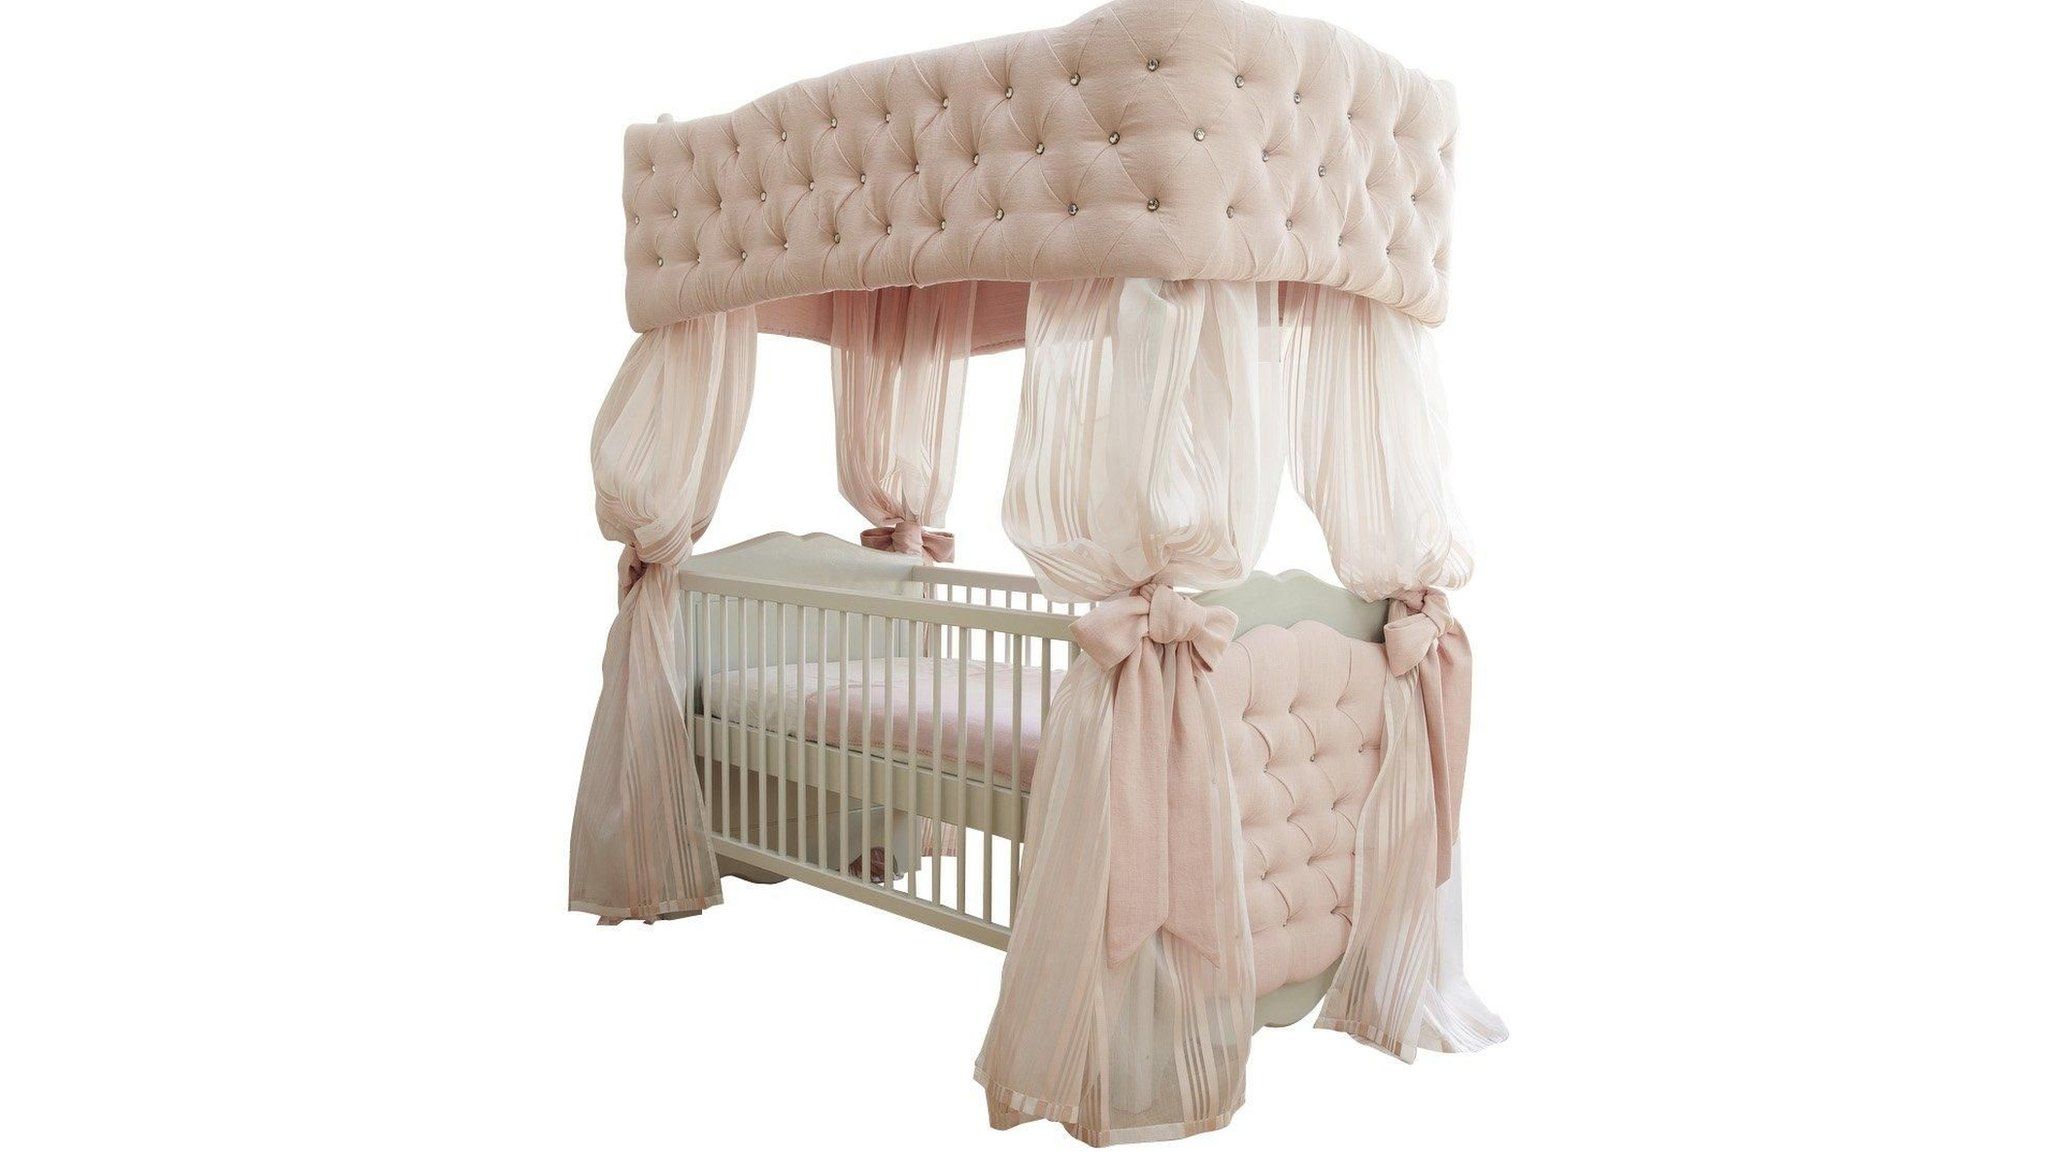 Little Duchess cot with extravagant drapes